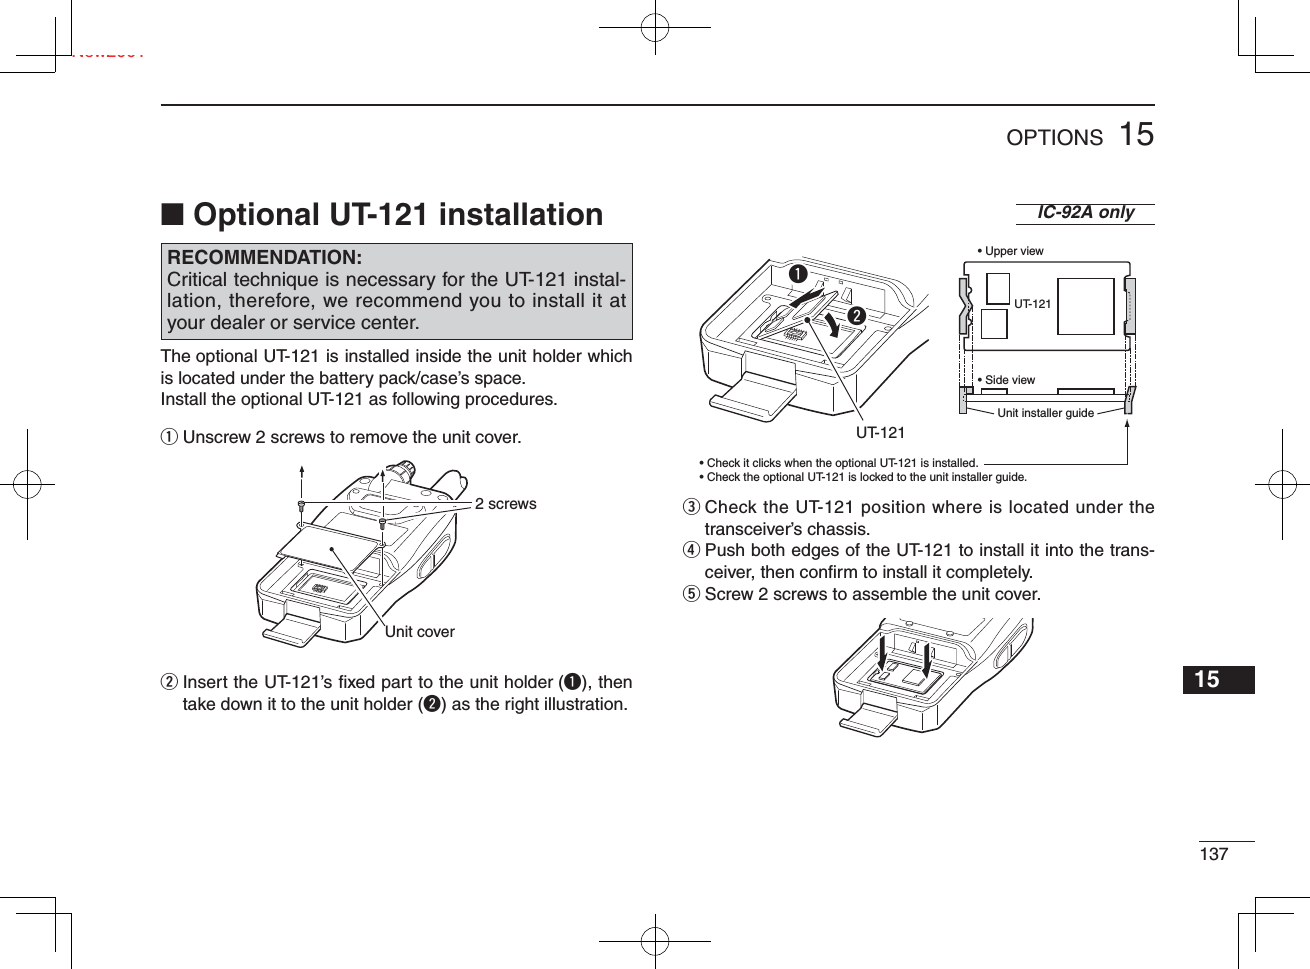 13715OPTIONSNew200112345678910111213141516171819The optional UT-121 is installed inside the unit holder which is located under the battery pack/case’s space.Install the optional UT-121 as following procedures.q  Unscrew 2 screws to remove the unit cover.w  Insert the UT-121’s ﬁ xed part to the unit holder (q), then take down it to the unit holder (w) as the right illustration.e  Check the UT-121 position where is located under the transceiver’s chassis.r  Push both edges of the UT-121 to install it into the trans-ceiver, then conﬁ rm to install it completely.t  Screw 2 screws to assemble the unit cover.■ Optional UT-121 installation RECOMMENDATION:Critical technique is necessary for the UT-121 instal-lation, therefore, we recommend you to install it at your dealer or service center.2 screwsUnit coverqwUT-121UT-121• Upper view• Side view• Check it clicks when the optional UT-121 is installed.• Check the optional UT-121 is locked to the unit installer guide.Unit installer guideIC-92A only